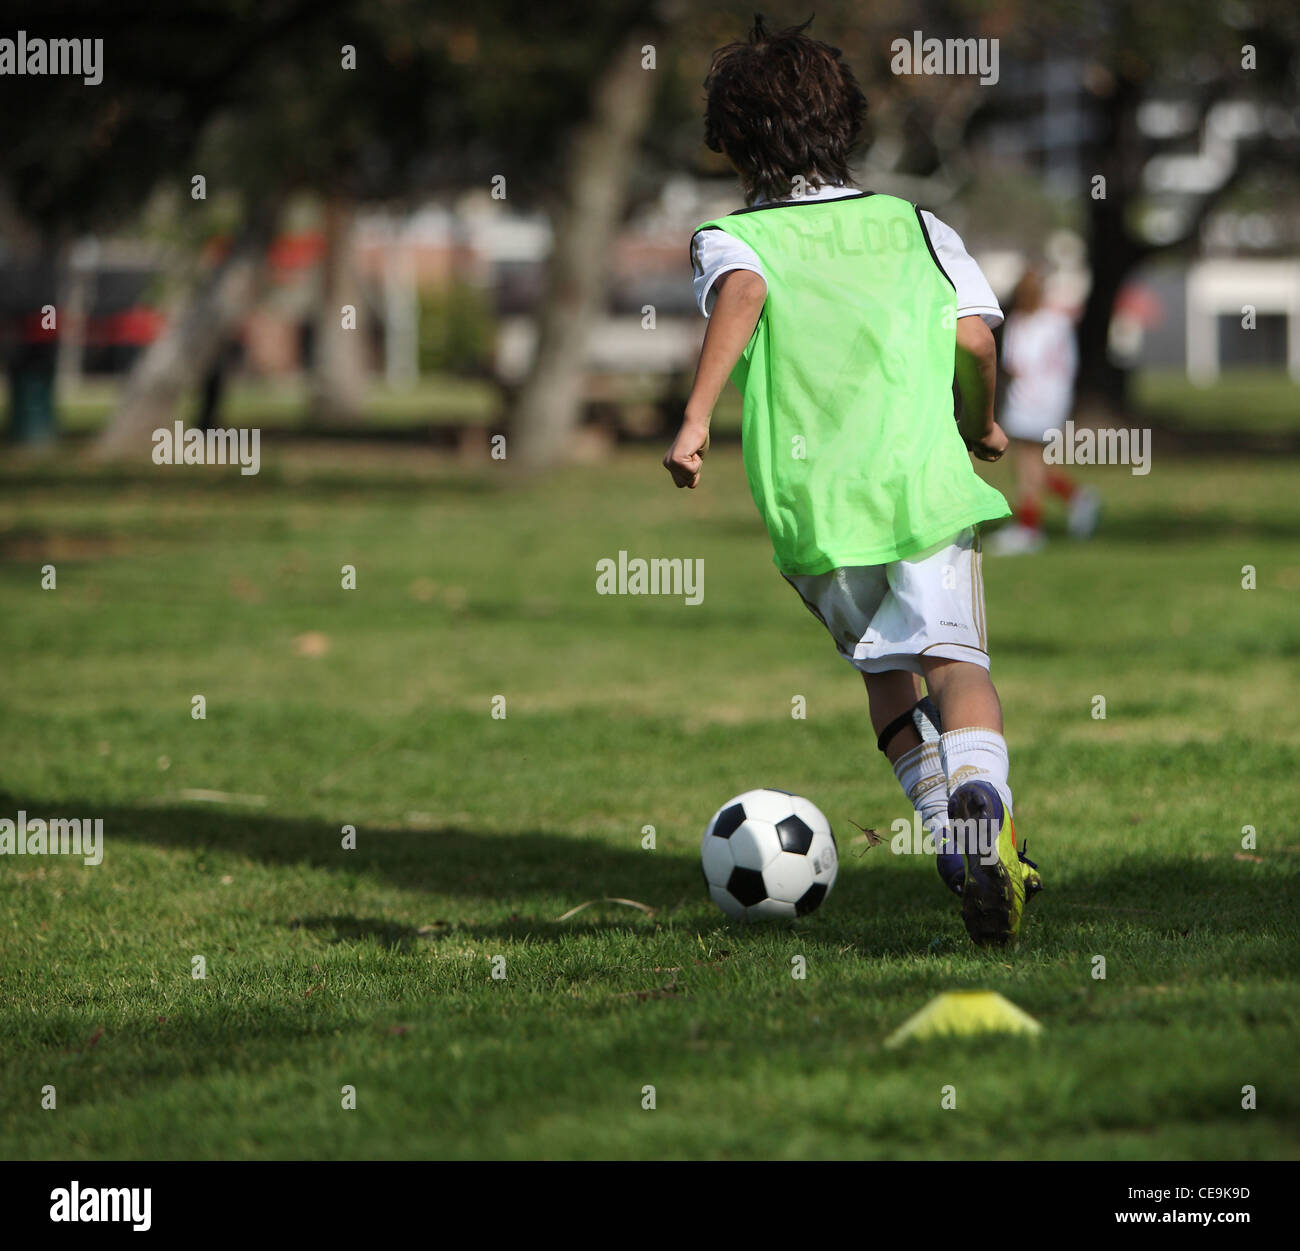 Young boy practices soccer for a youth team in Southern California.  Soccer is becoming much more popular in the U.S. Stock Photo